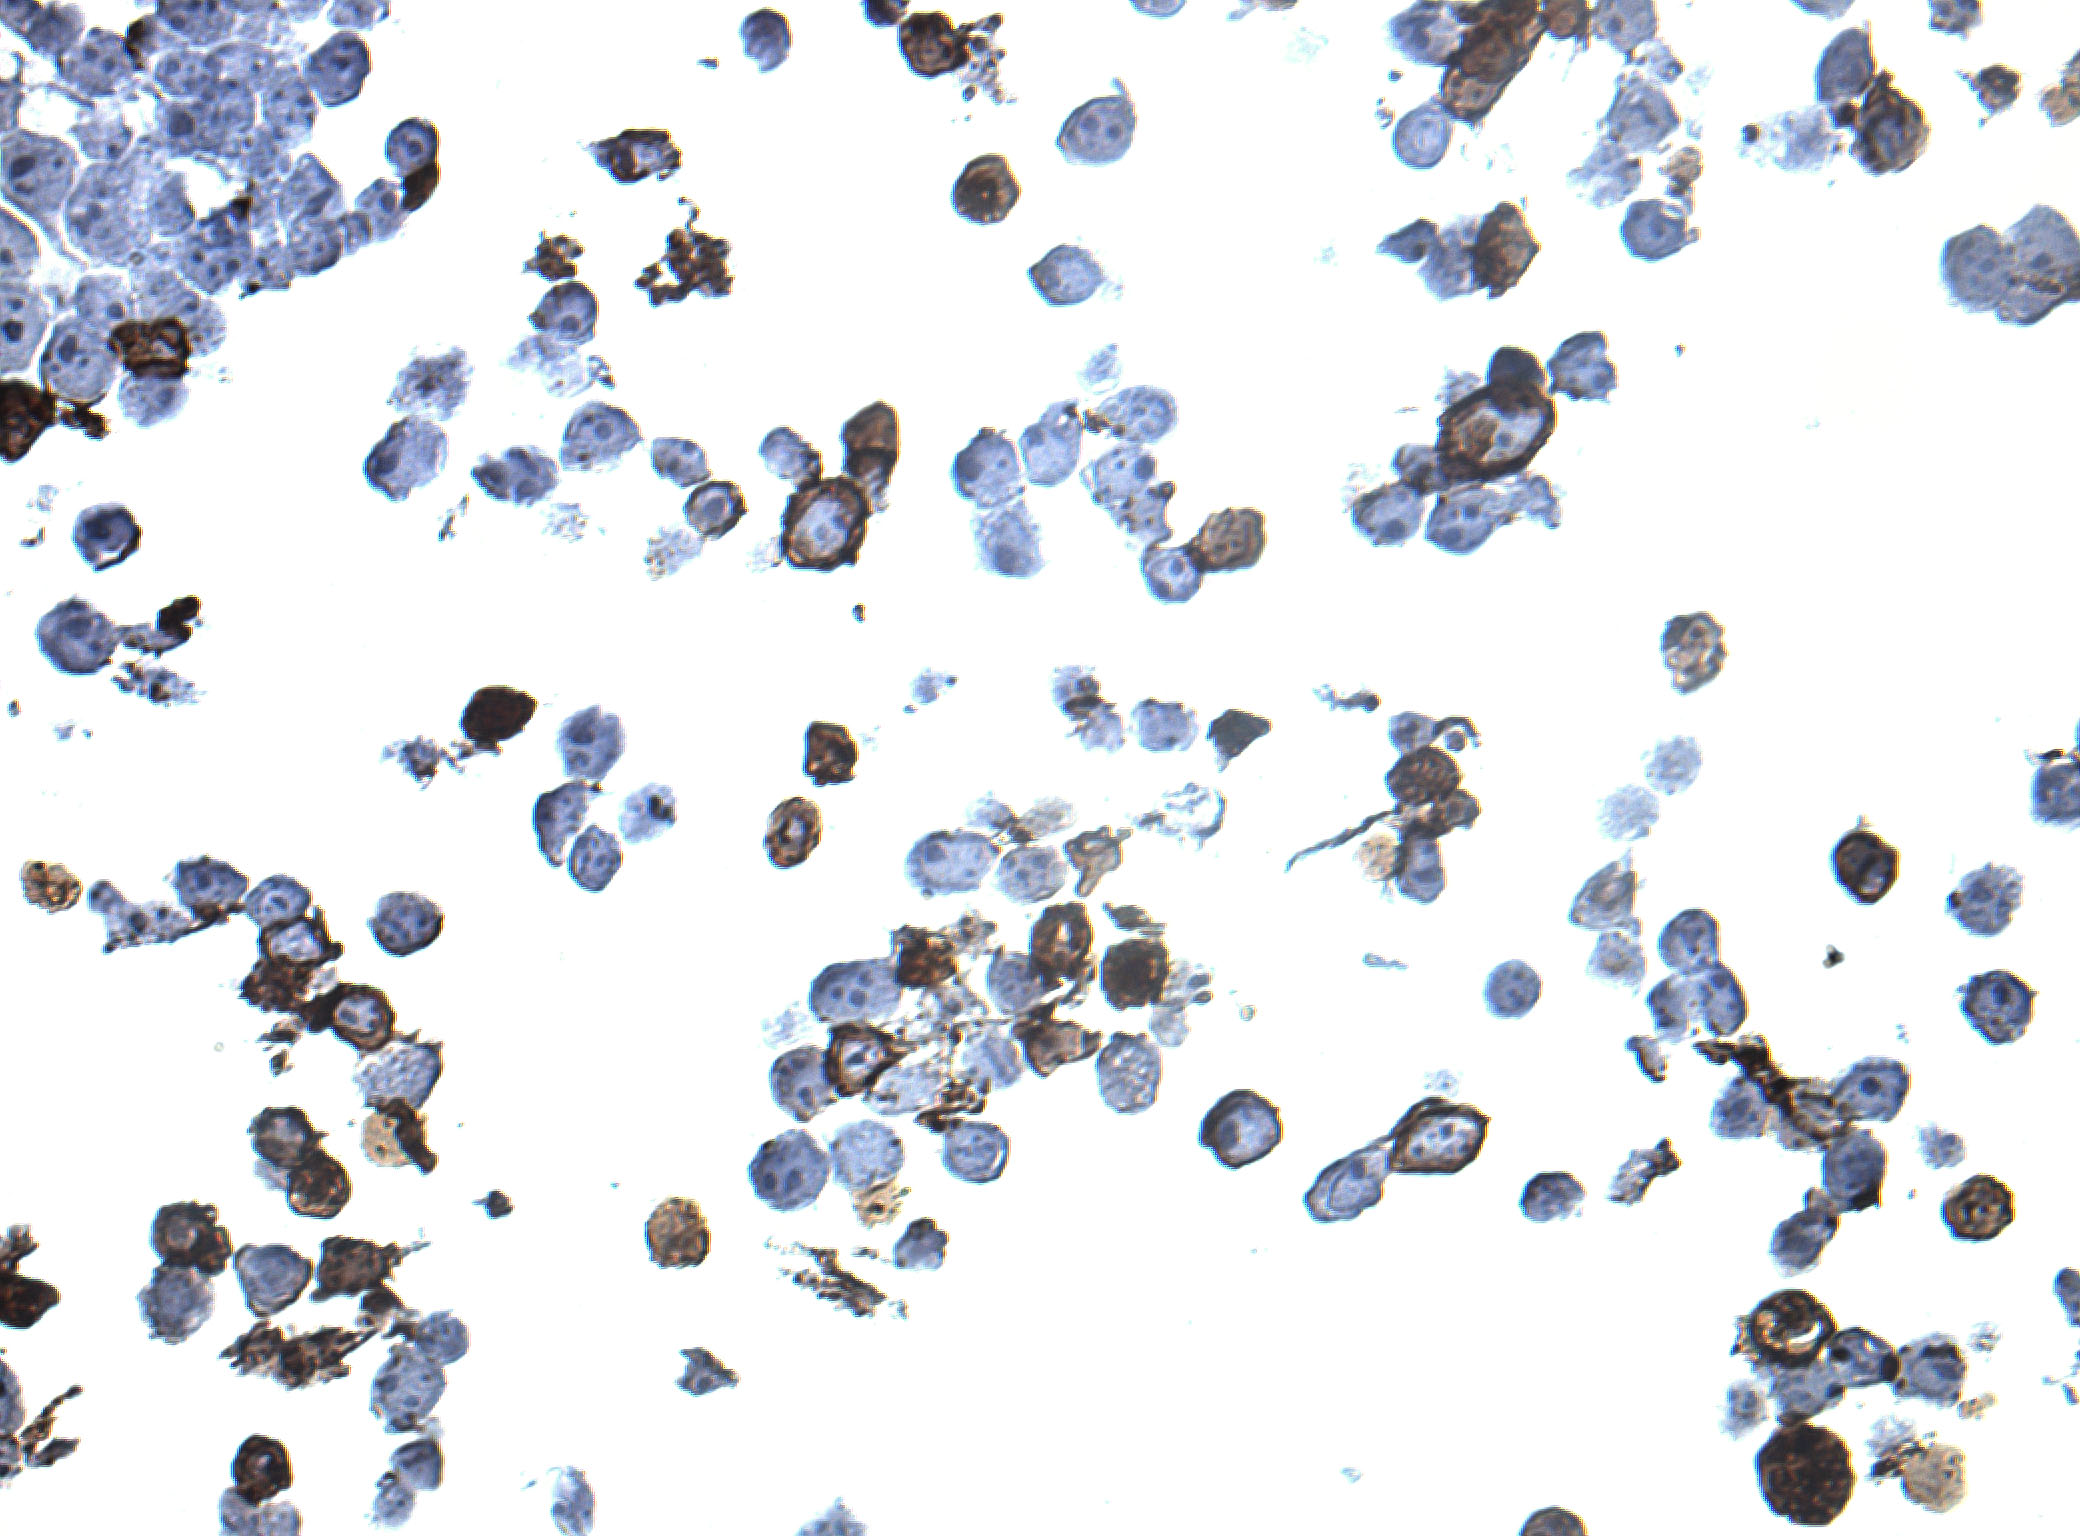 Immunohistology staining on PCDHGA2 overexpressed cytosection TS410863P5 with mouse anti DDK clone OTI11C3 C/N TA180144 at 1:400 dilution 4C O/N. Antibody staining was achieved with HIER Citrate pH6 , Polink1 with DAB chromogen detection kit (D11-18). Positive stain shown with the brown chromogen present. HEK293T cells were transfected with cDNA clone RC210863, 5 micron sections, 40x magnification